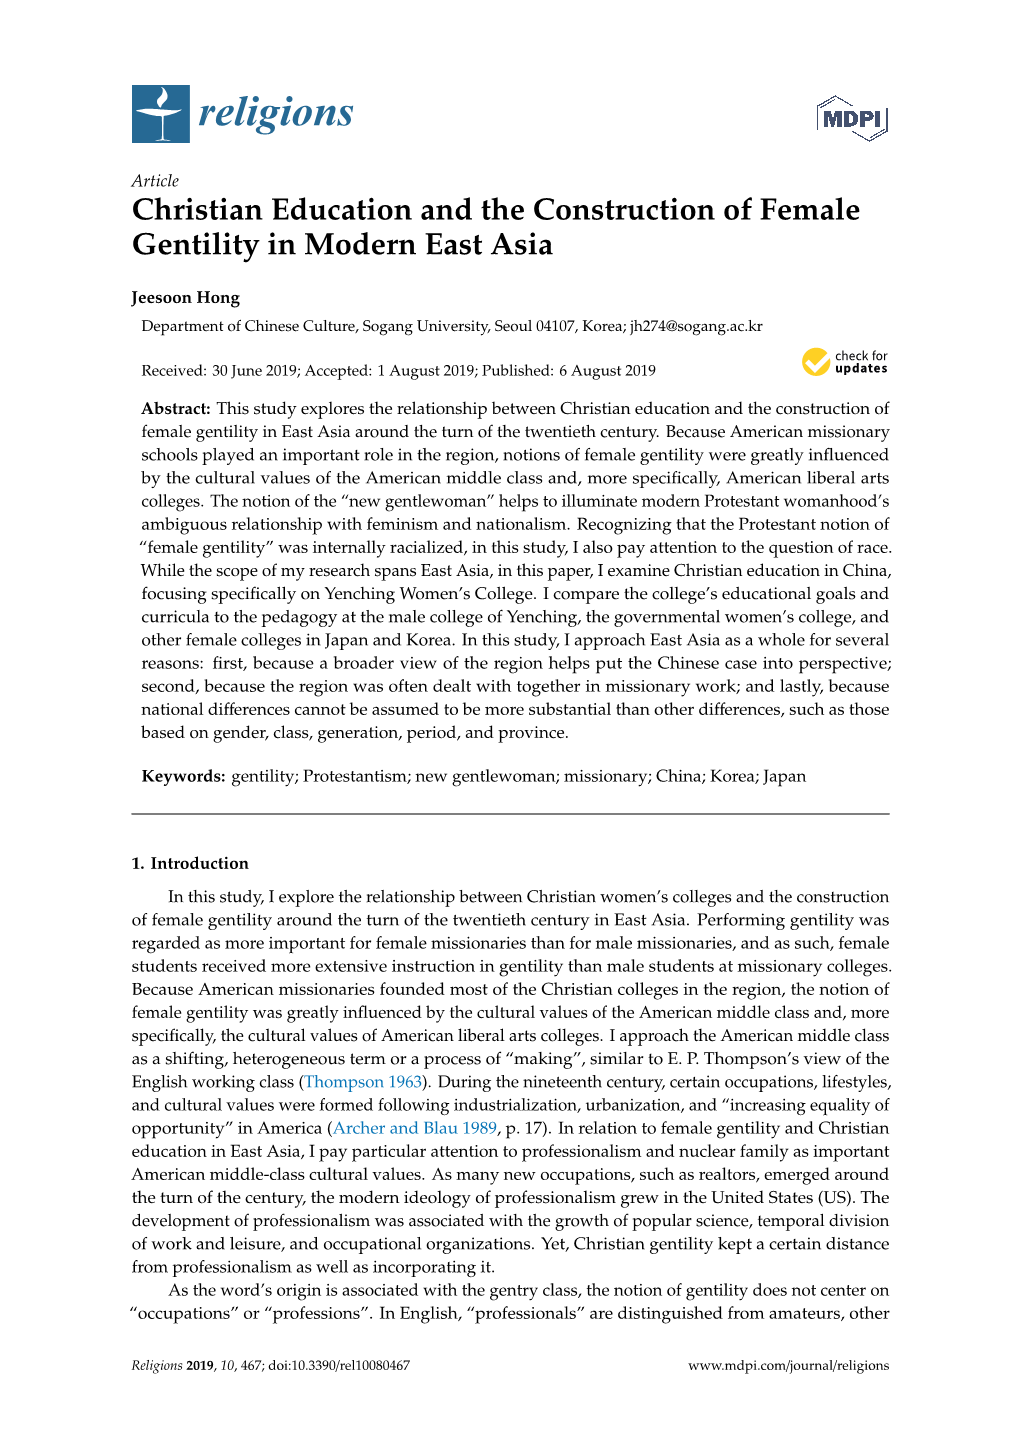 Christian Education and the Construction of Female Gentility in Modern East Asia